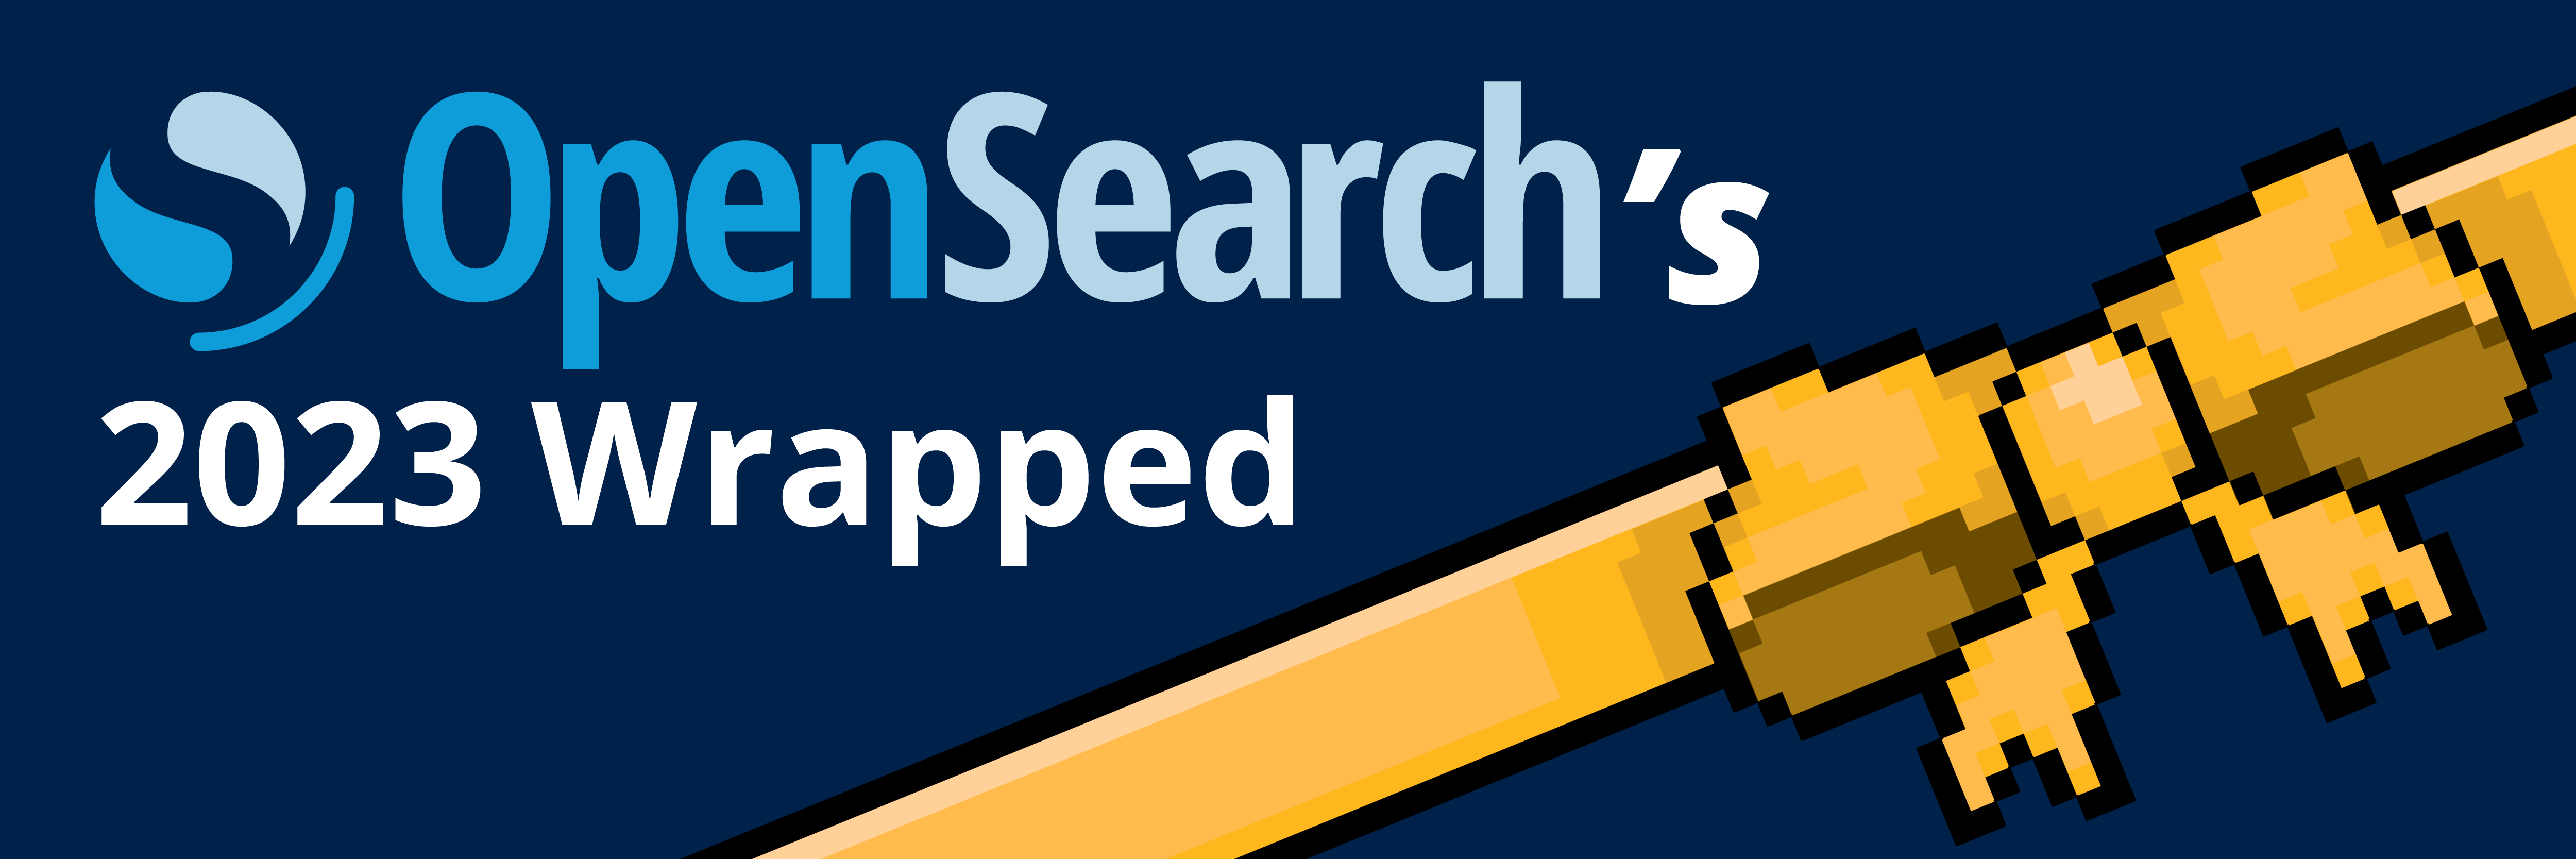 OpenSearch's 2023 Wrapped: a year in review